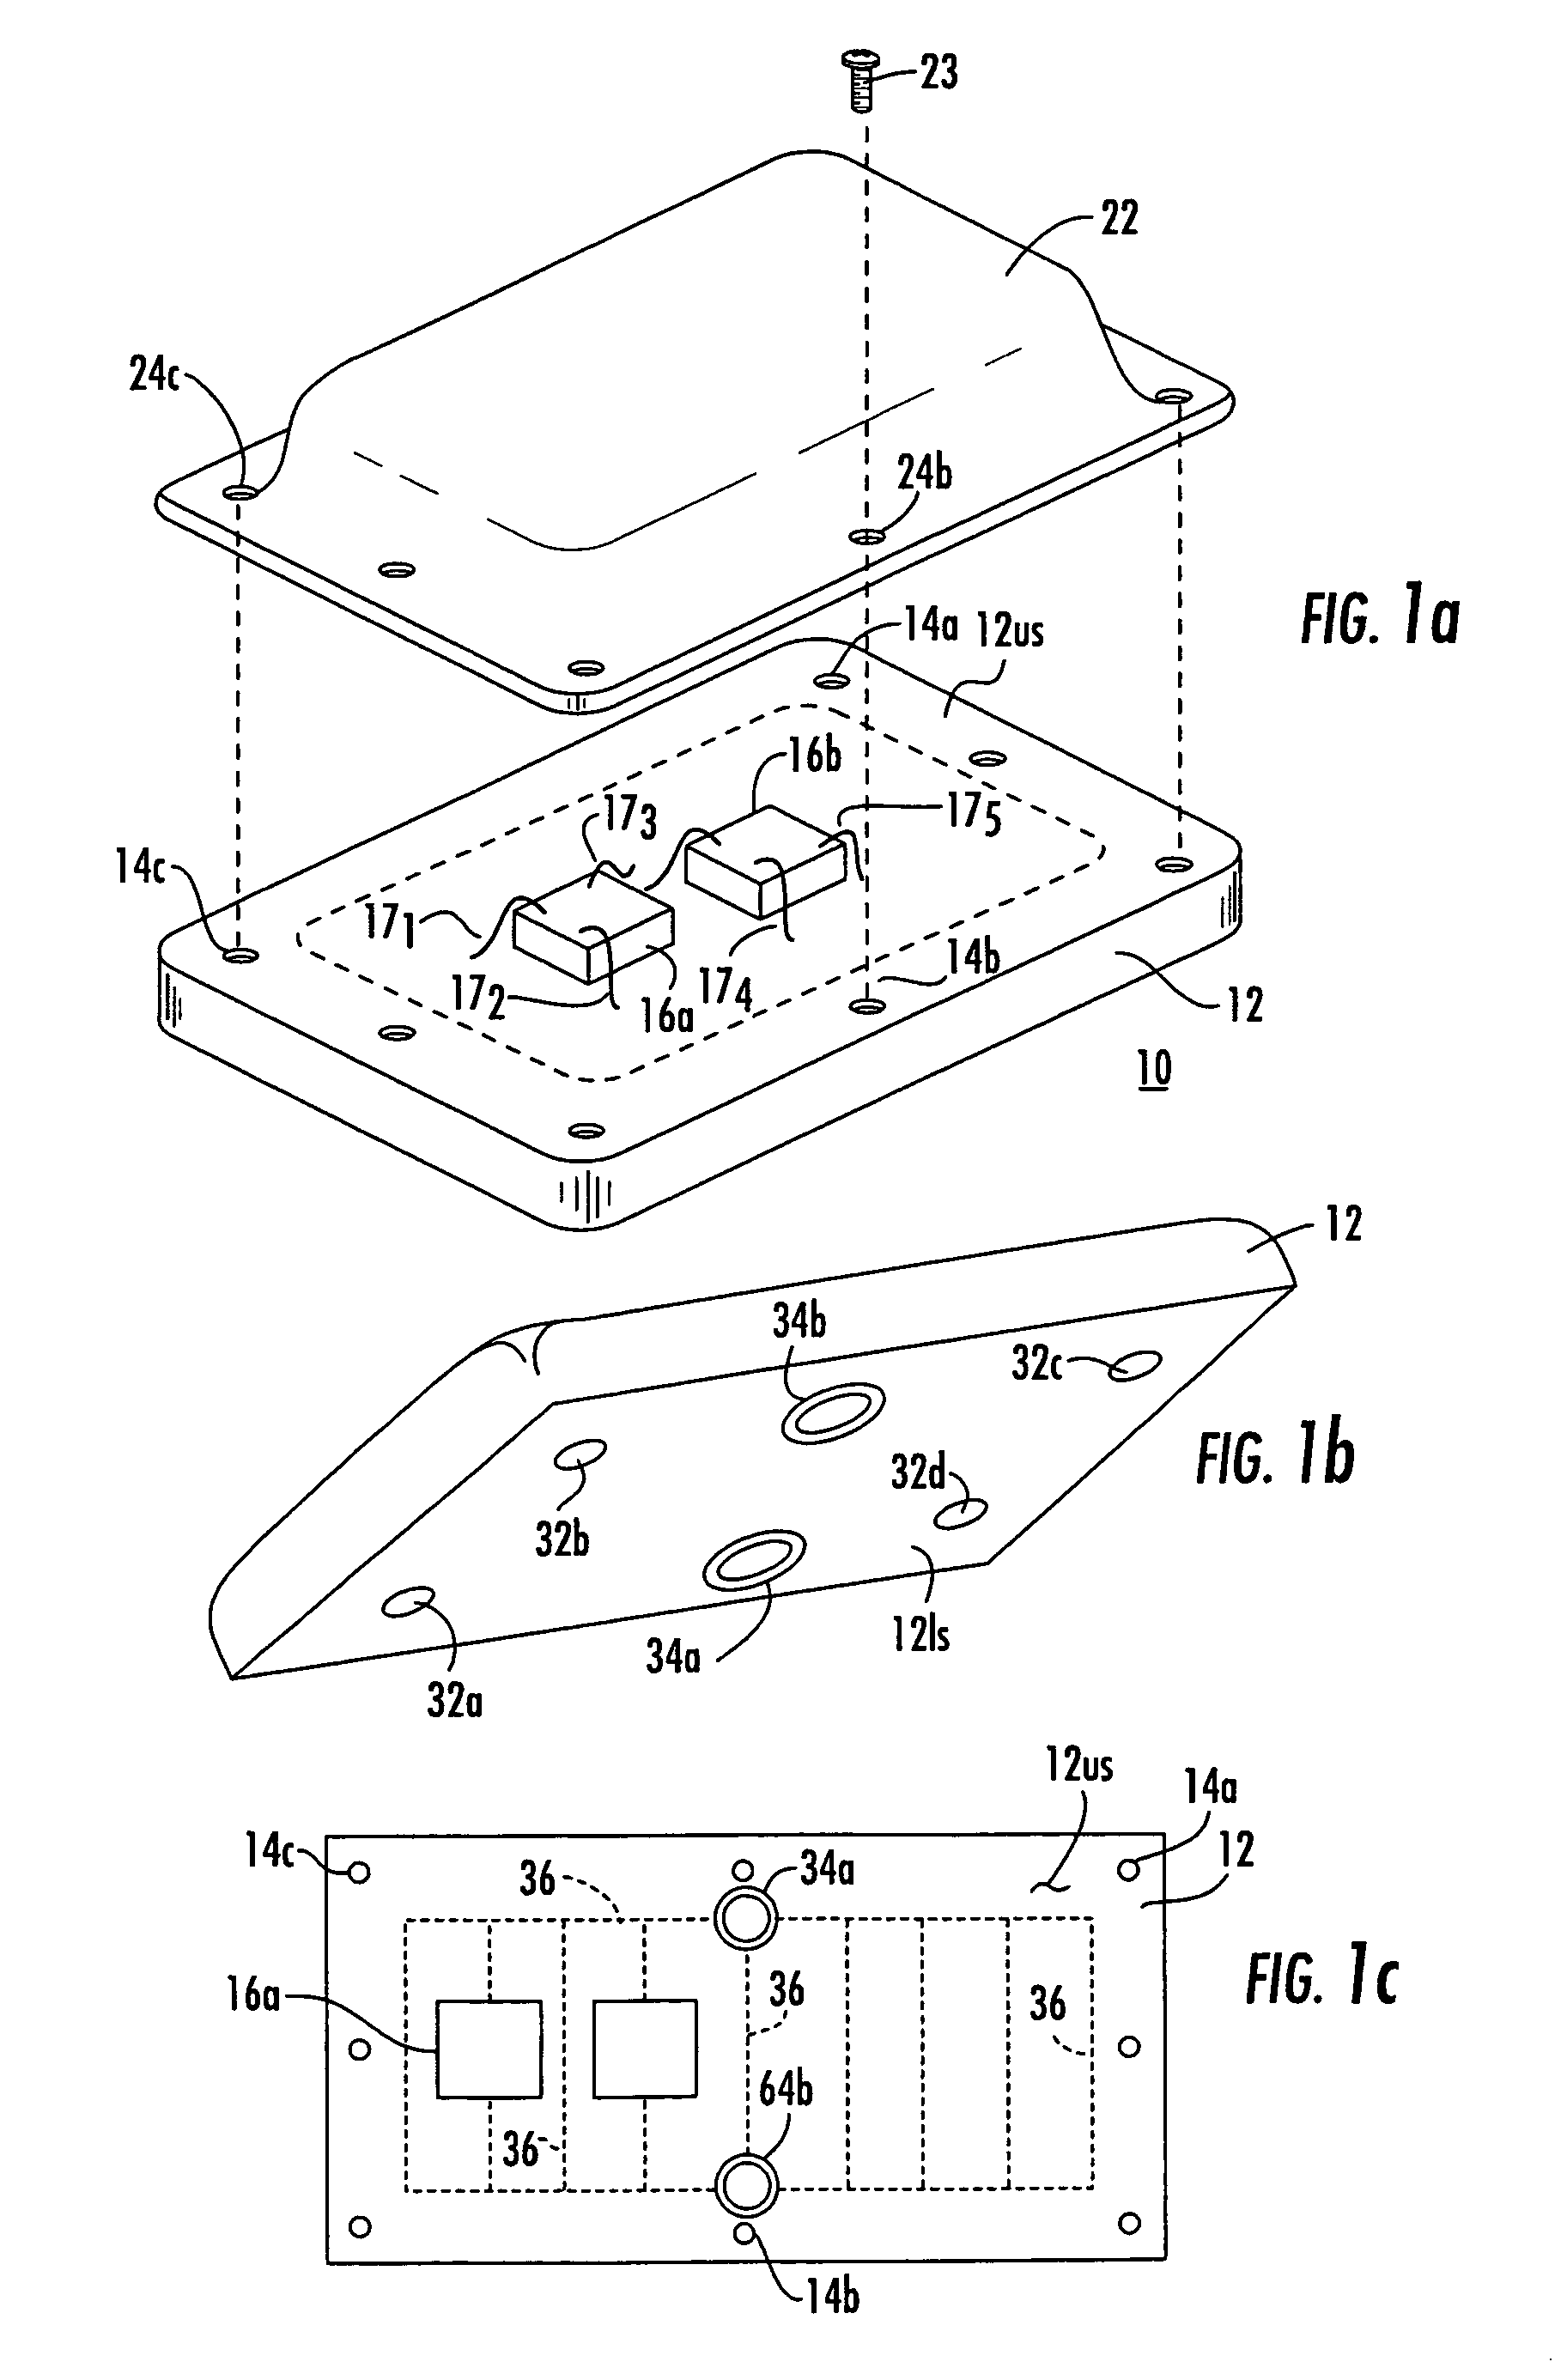 Parallel cooling of heat source mounted on a heat sink by means of liquid coolant